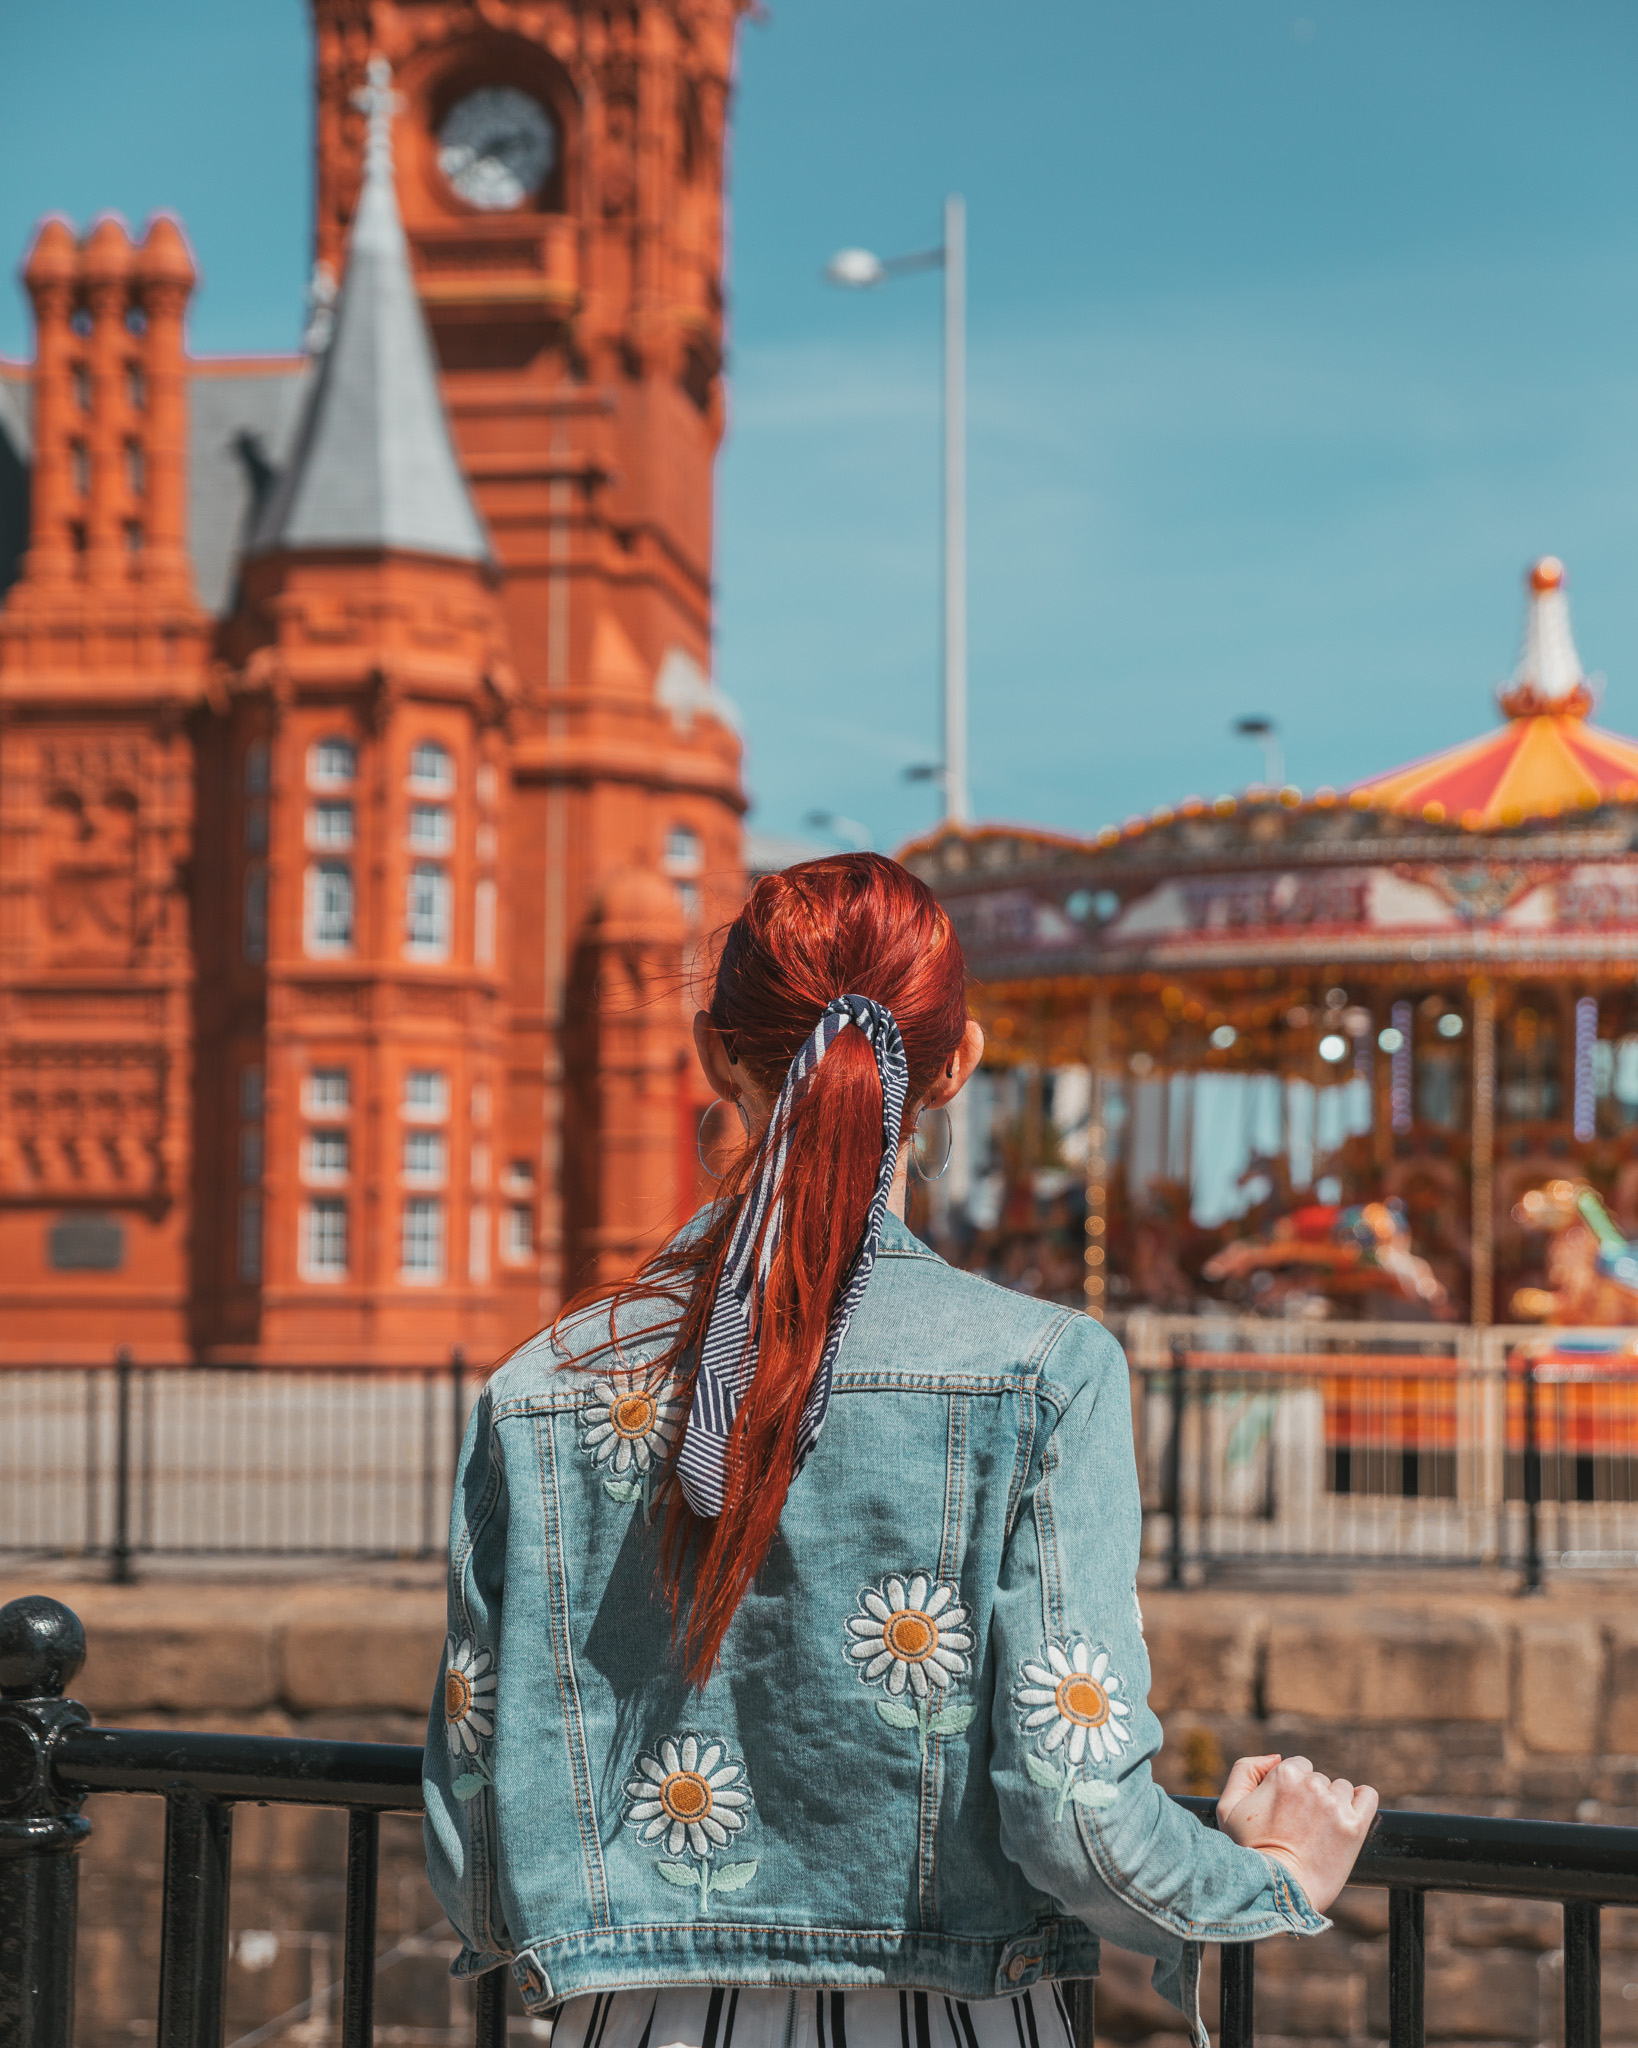 Cardiff // The Most Beautiful Places to Visit in Wales // #readysetjetset #wales #uk #welsh #travel #photospots #blogpost